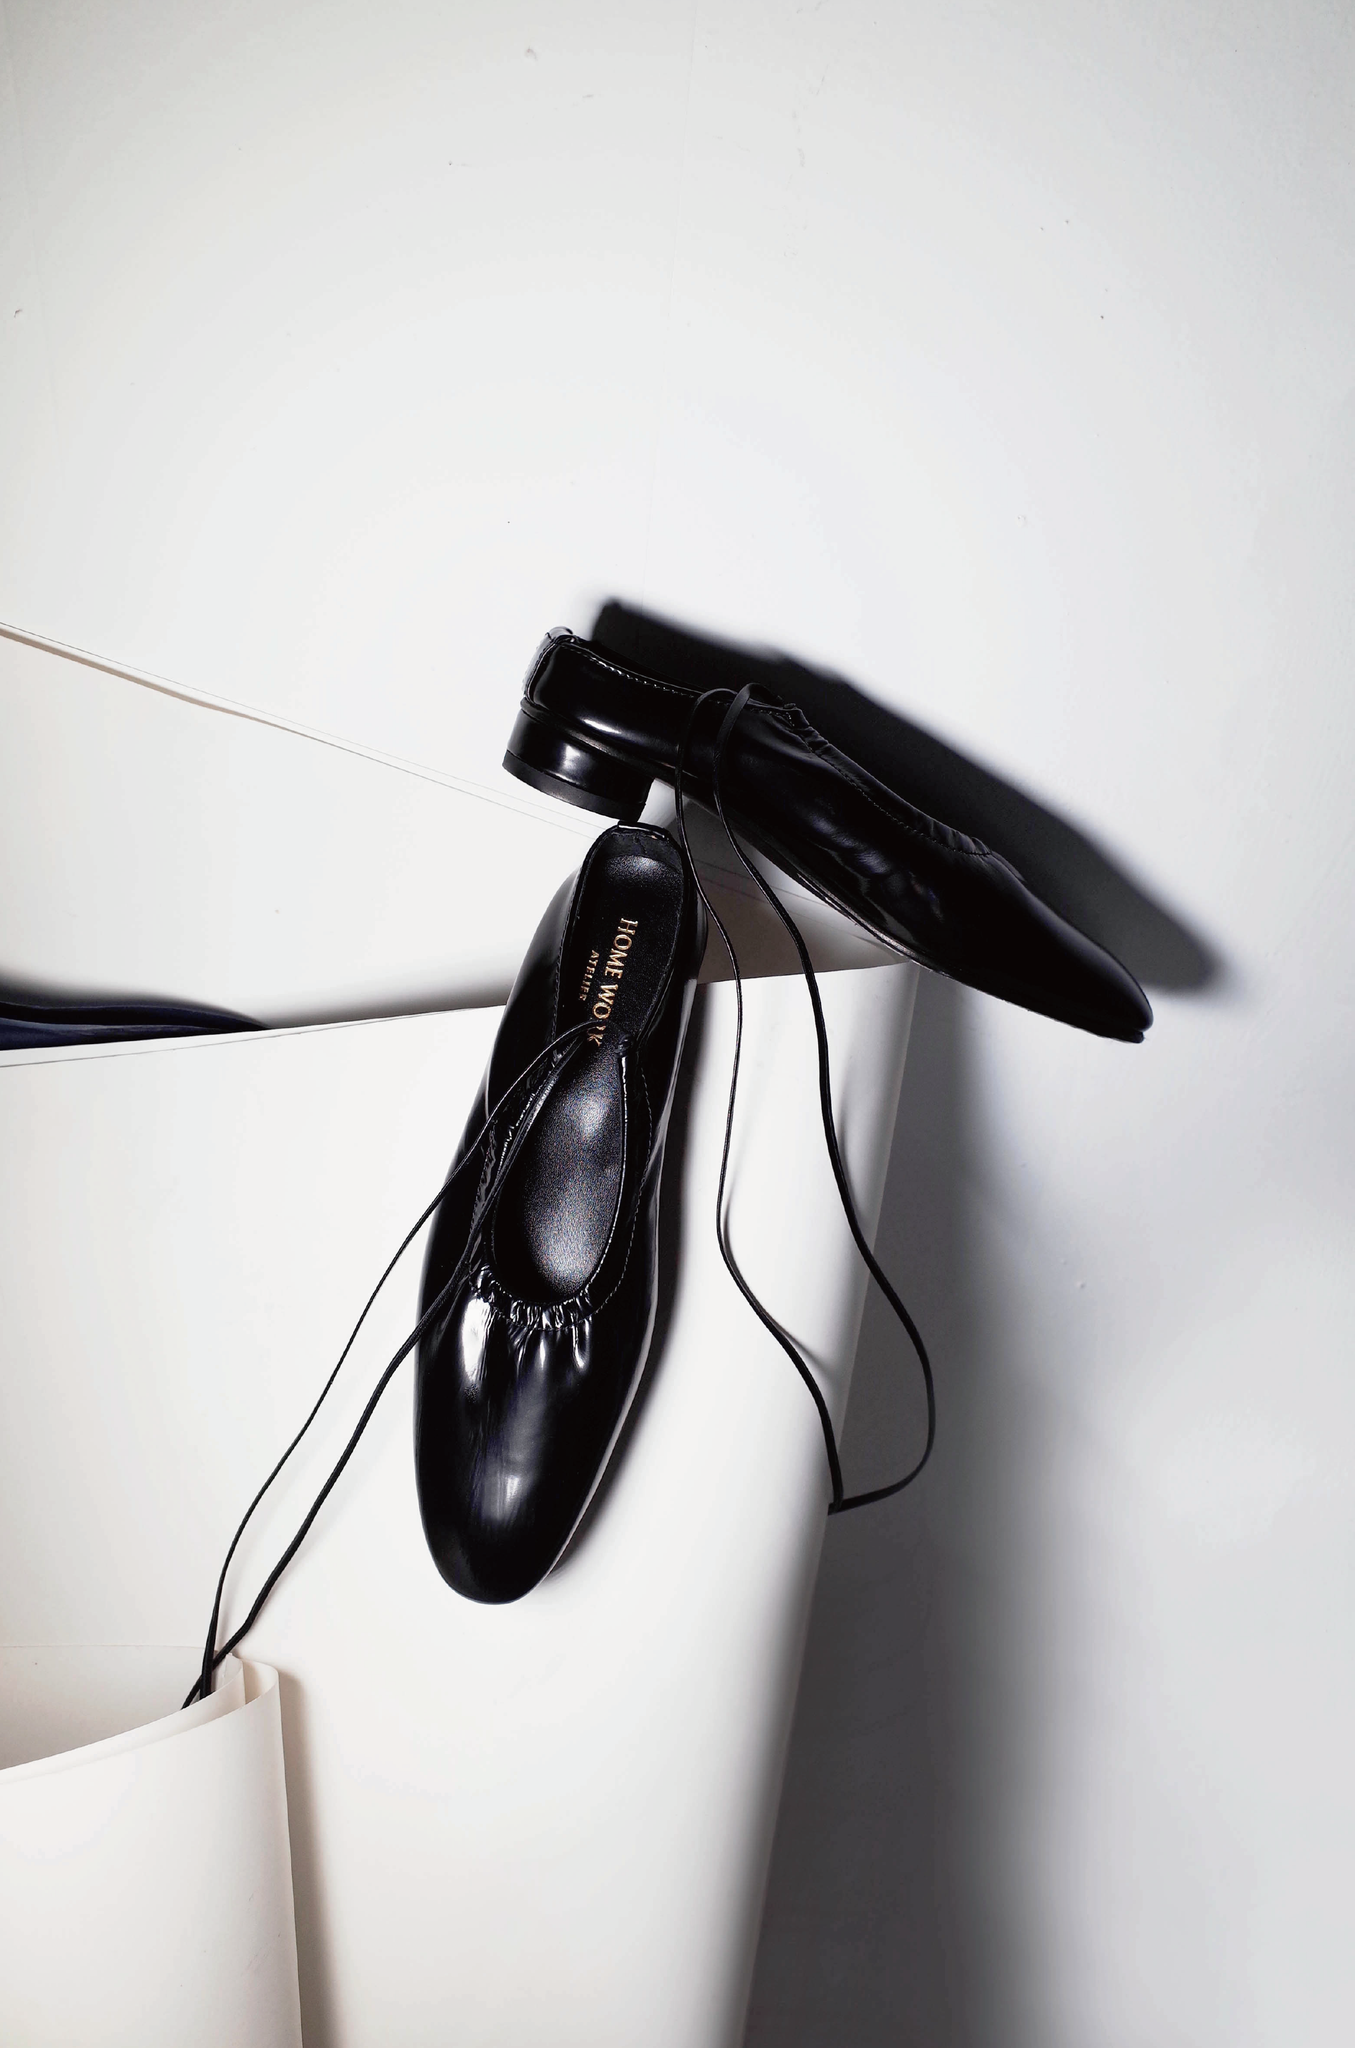 ・ Reserved items ・ Craftsman Made Leather 100% Ballet Shoes (Black)